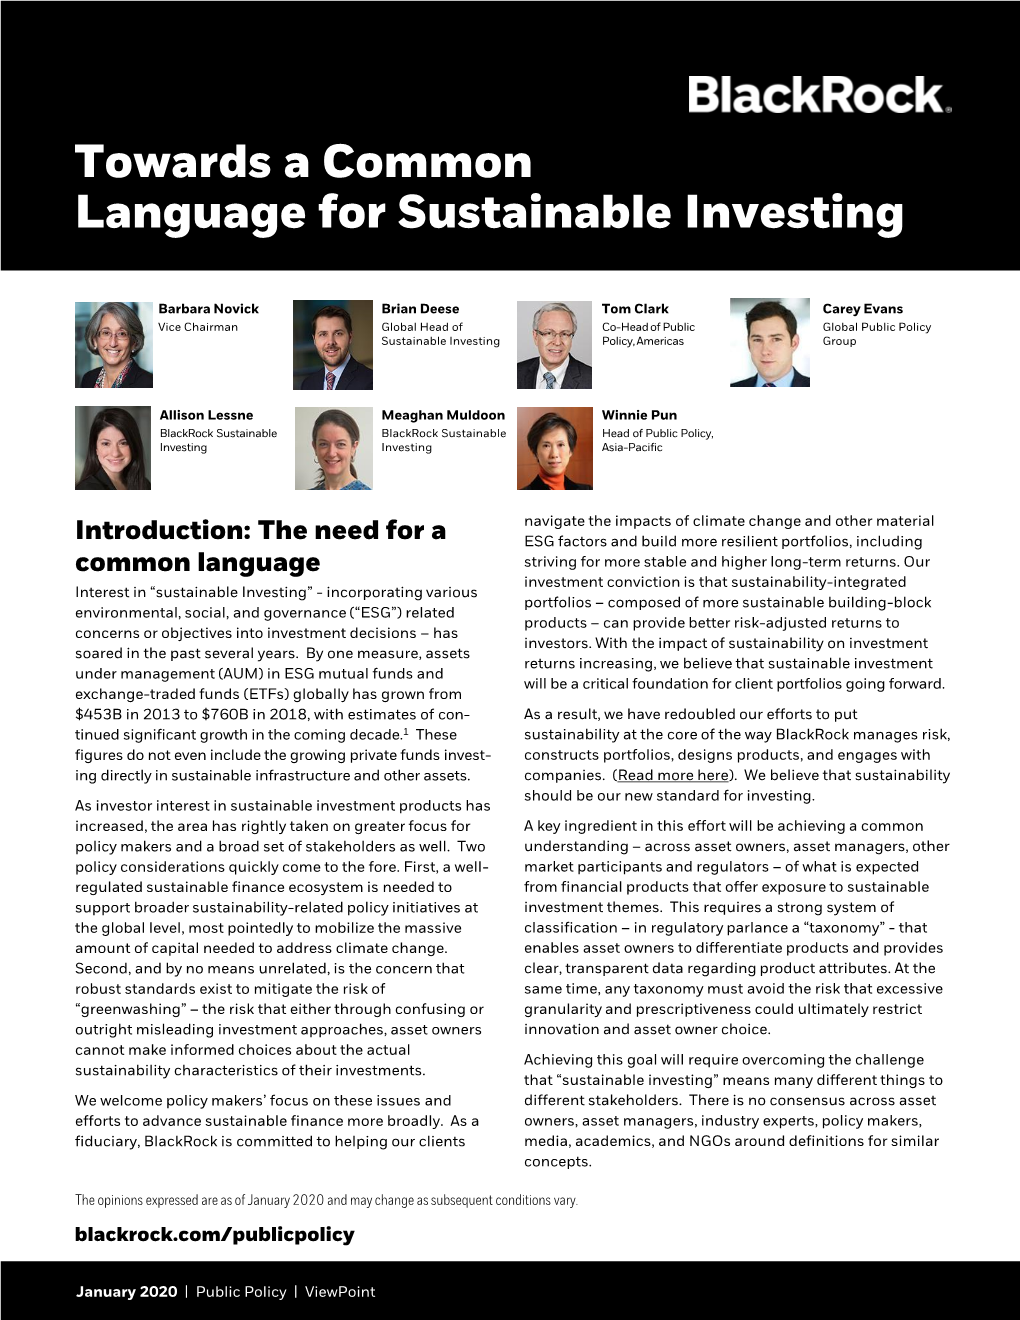 Towards a Common Language for Sustainable Investing